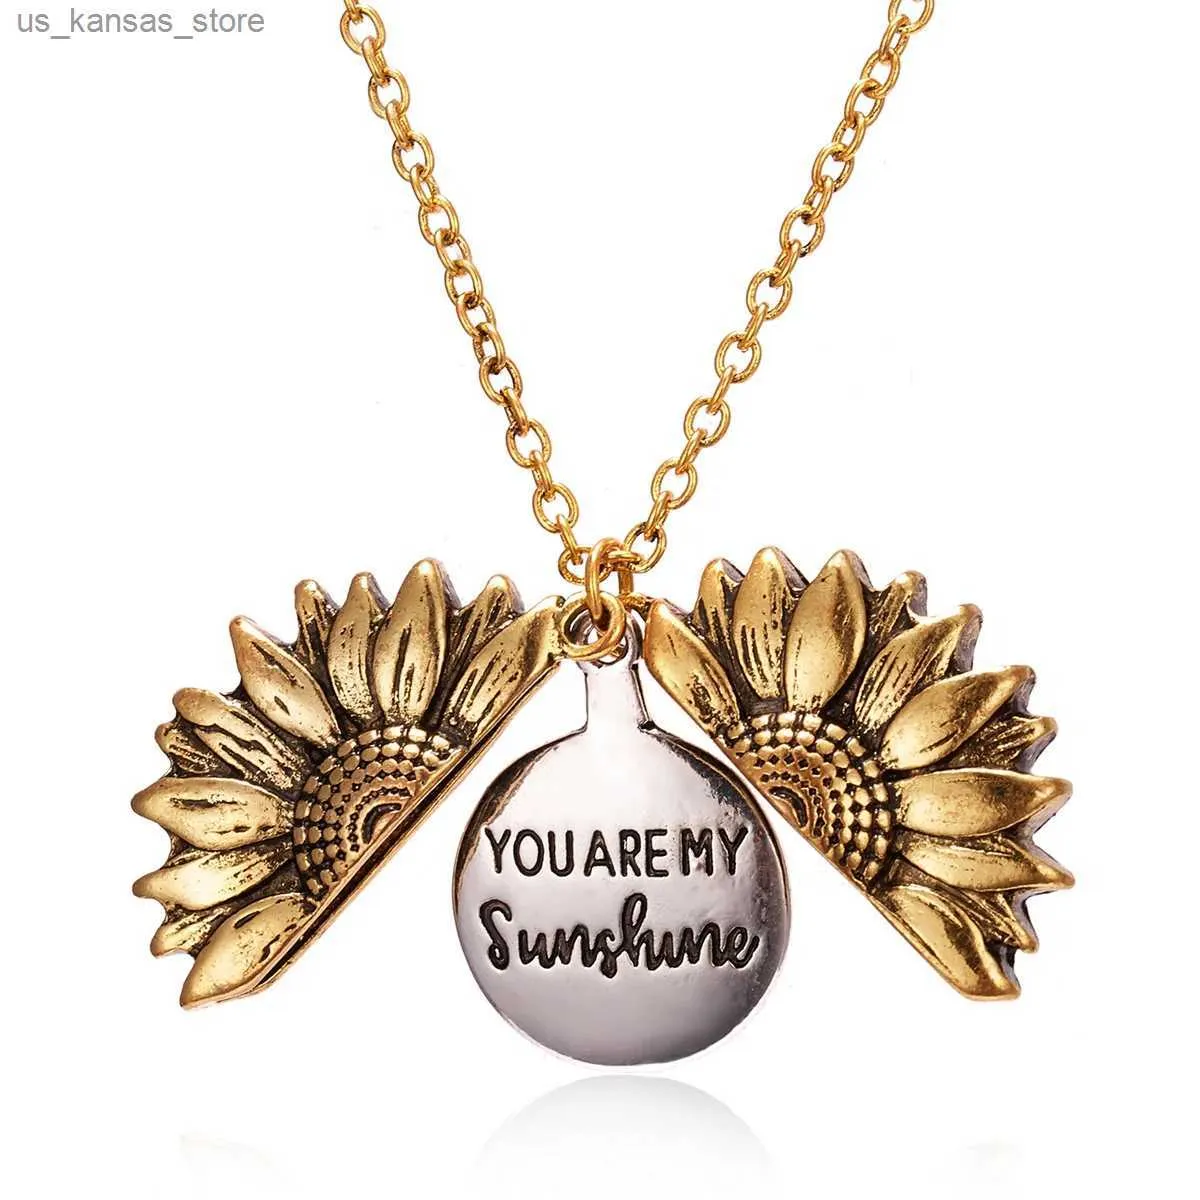 Pendant Necklaces You Are My Sunshine Open Locket Sunflower Pendant Necklace for Women Men Boho Summer Daisy Flower Necklace Party Jewelry Gifts24NUTU